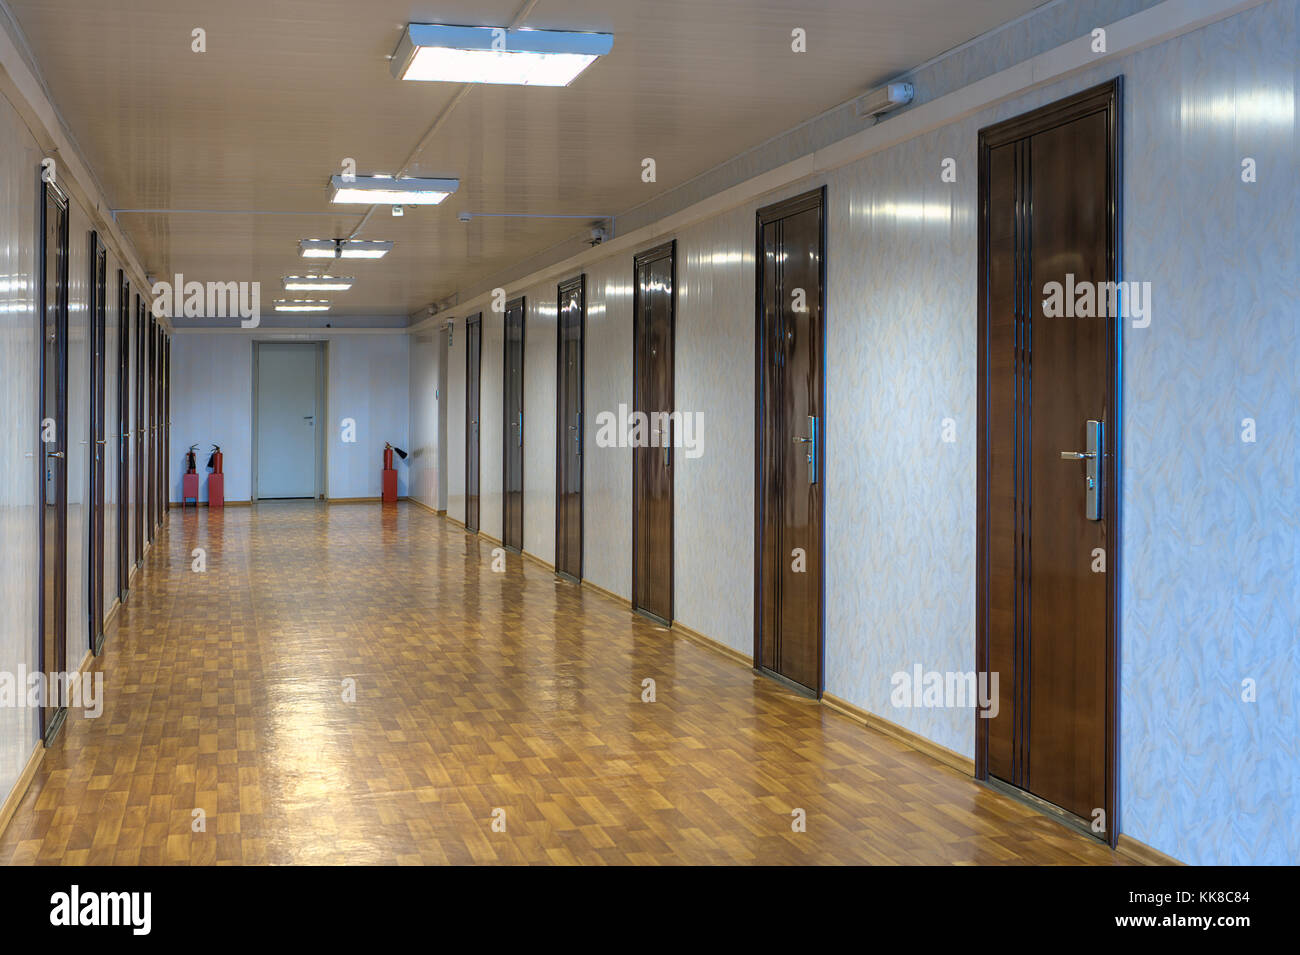 Long Office Hallway With Many Doors Of Dark Red Wood Stock